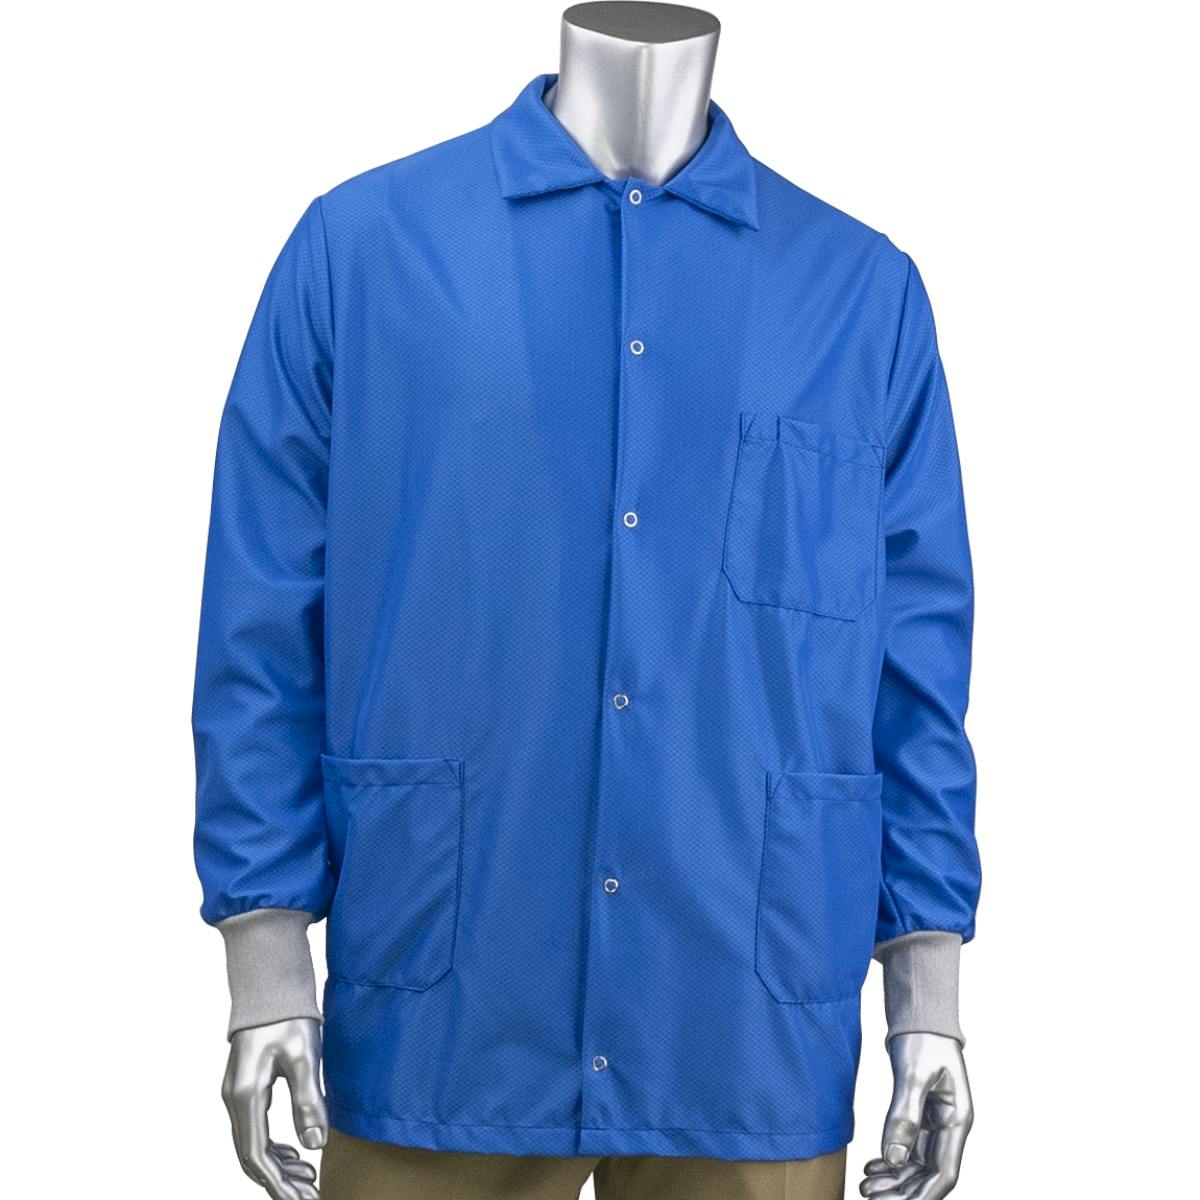 StatMaster Short ESD Labcoat - ESD Knit Cuff, Royal (BR49AC-47RB)